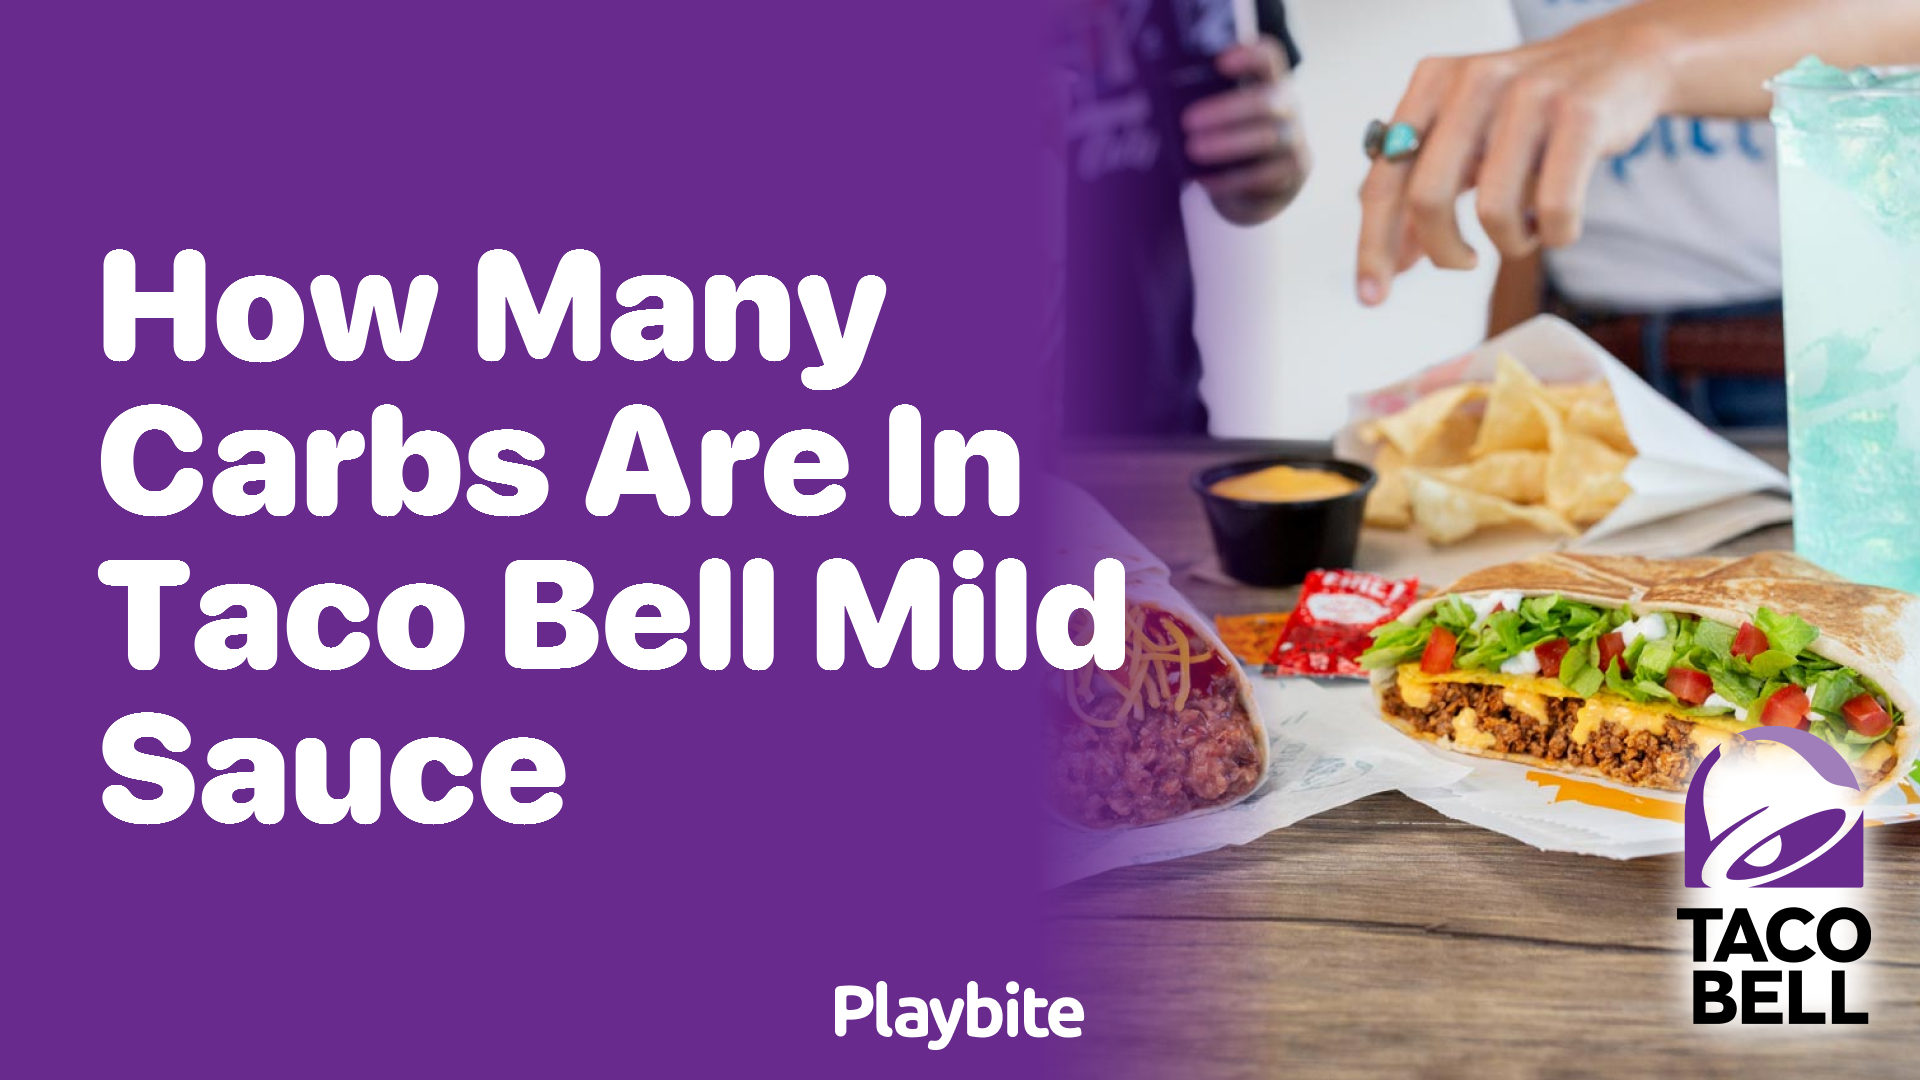 How Many Carbs Are in Taco Bell Mild Sauce?